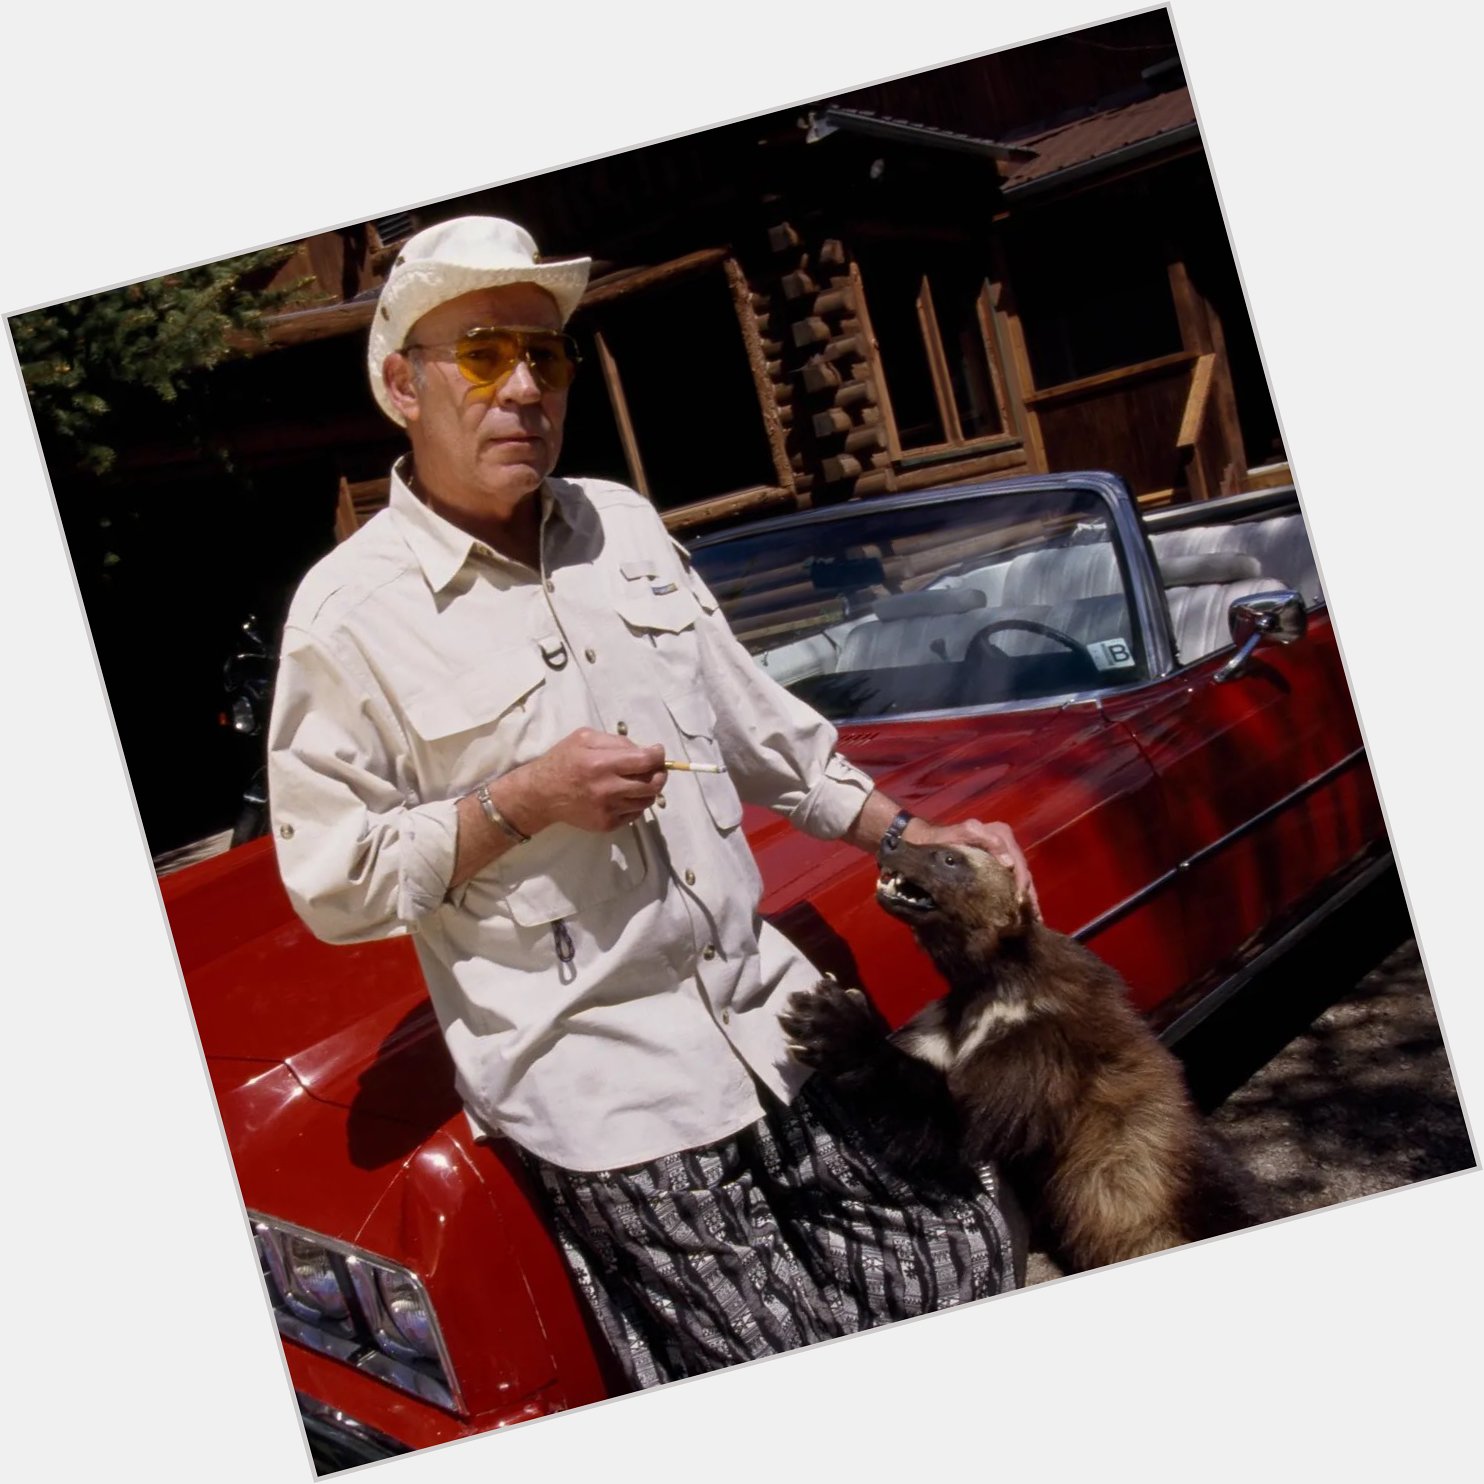 Happy Birthday to Hunter S. Thompson who would have been 84 today. I am lucky to share a birthday with him. 